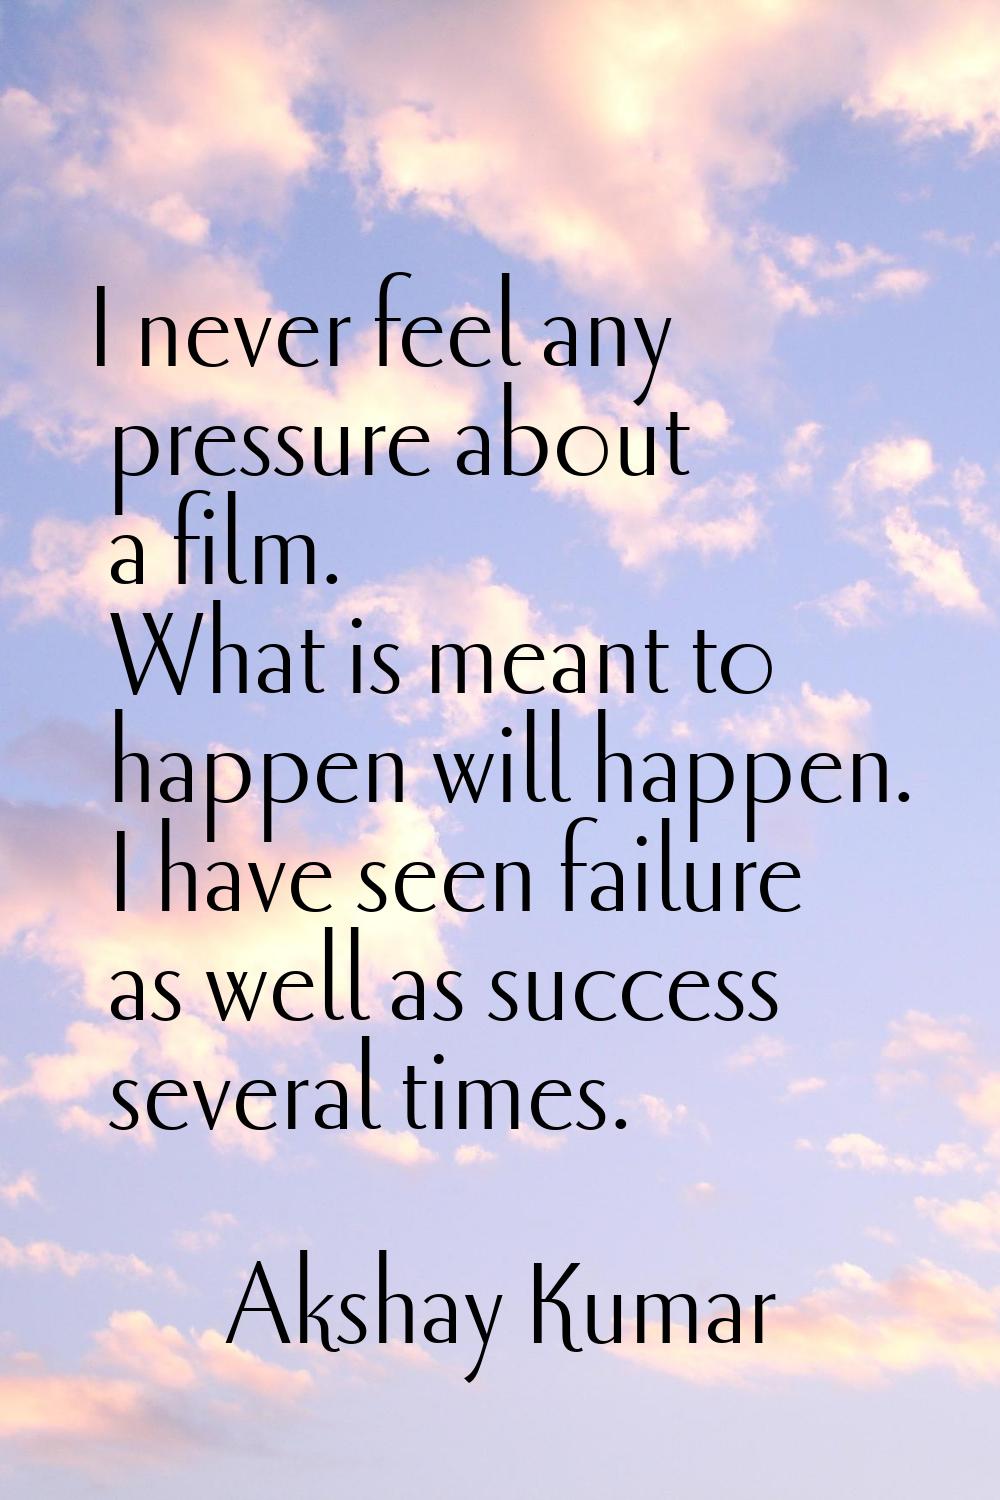 I never feel any pressure about a film. What is meant to happen will happen. I have seen failure as